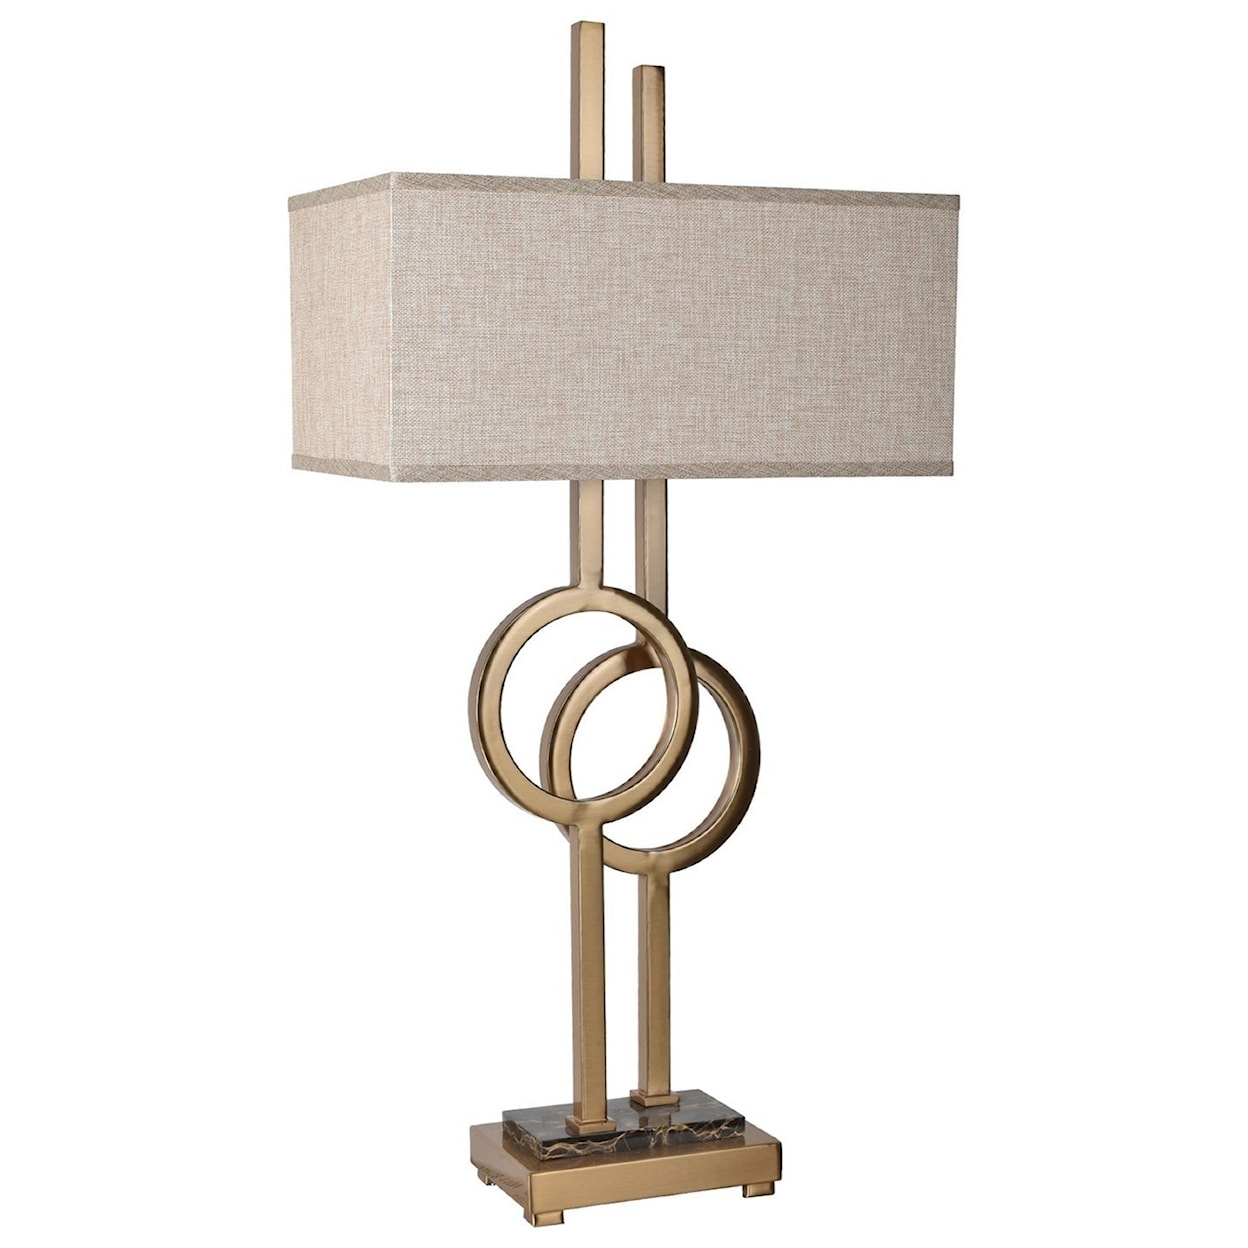 Crestview Collection Lighting Vinny Table Lamp